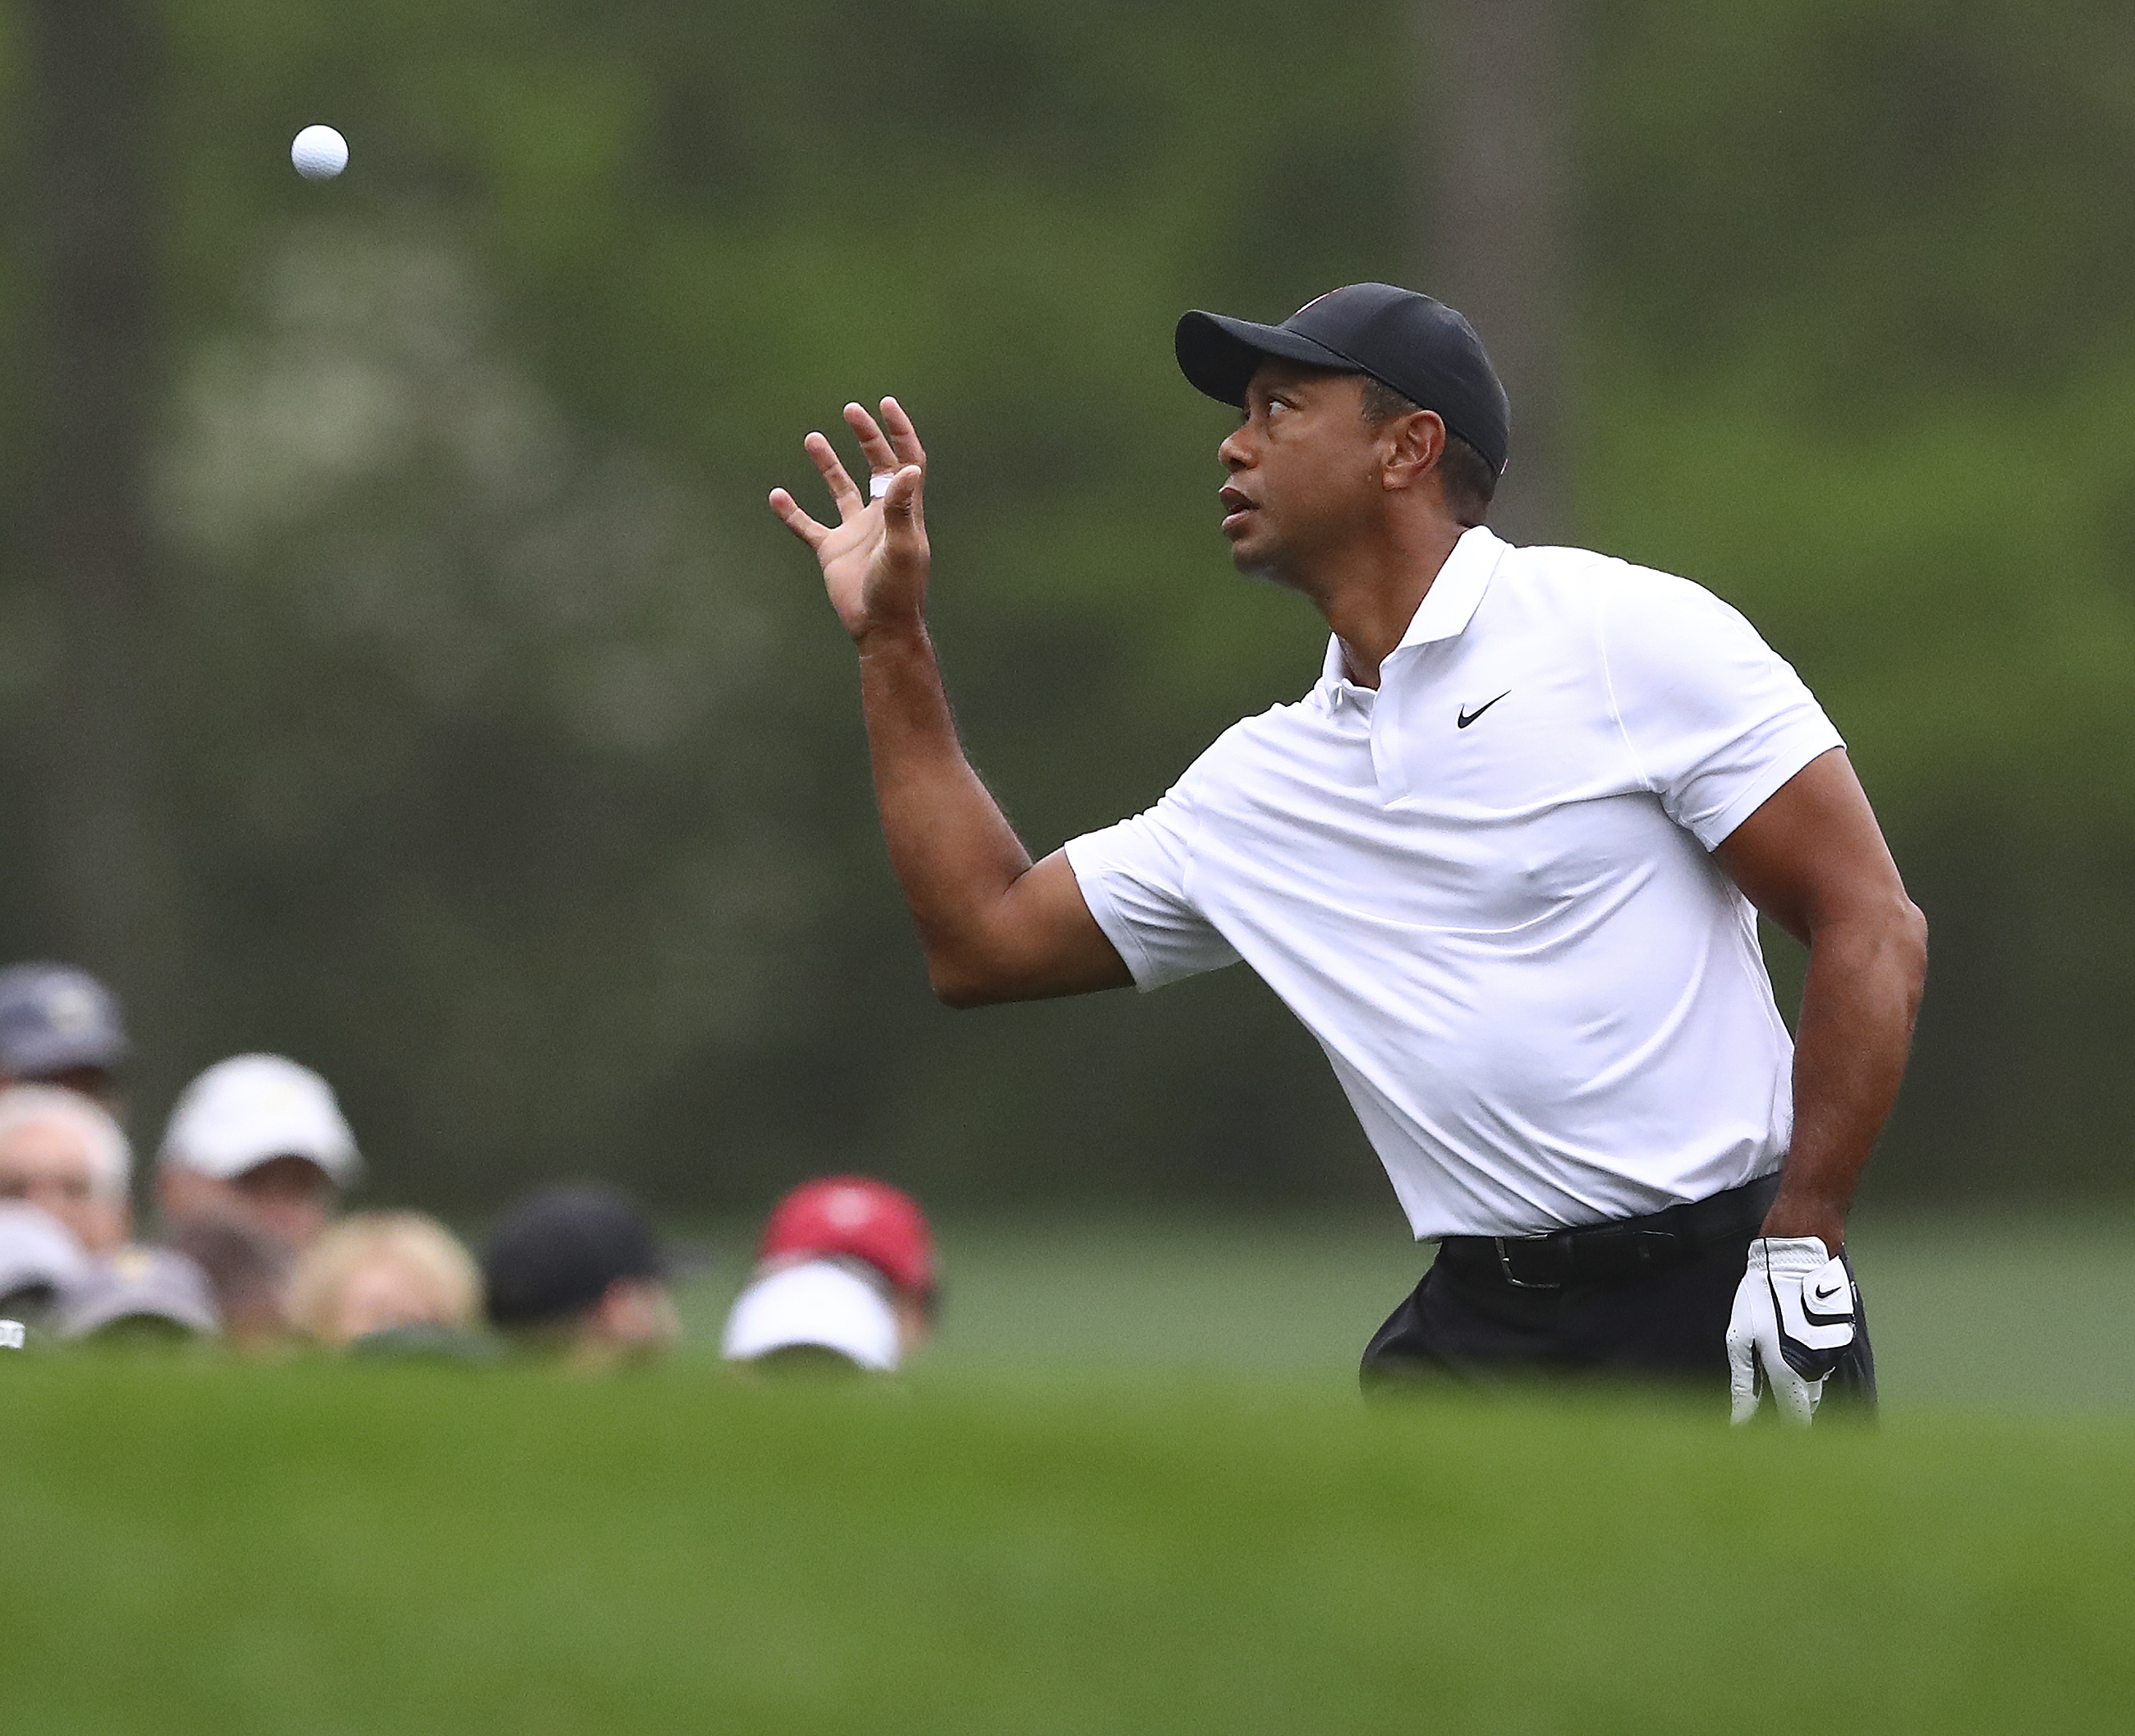 How to watch the Masters 2022 Tee times for Tiger Woods, Jon Rahm, more TV, live stream schedule